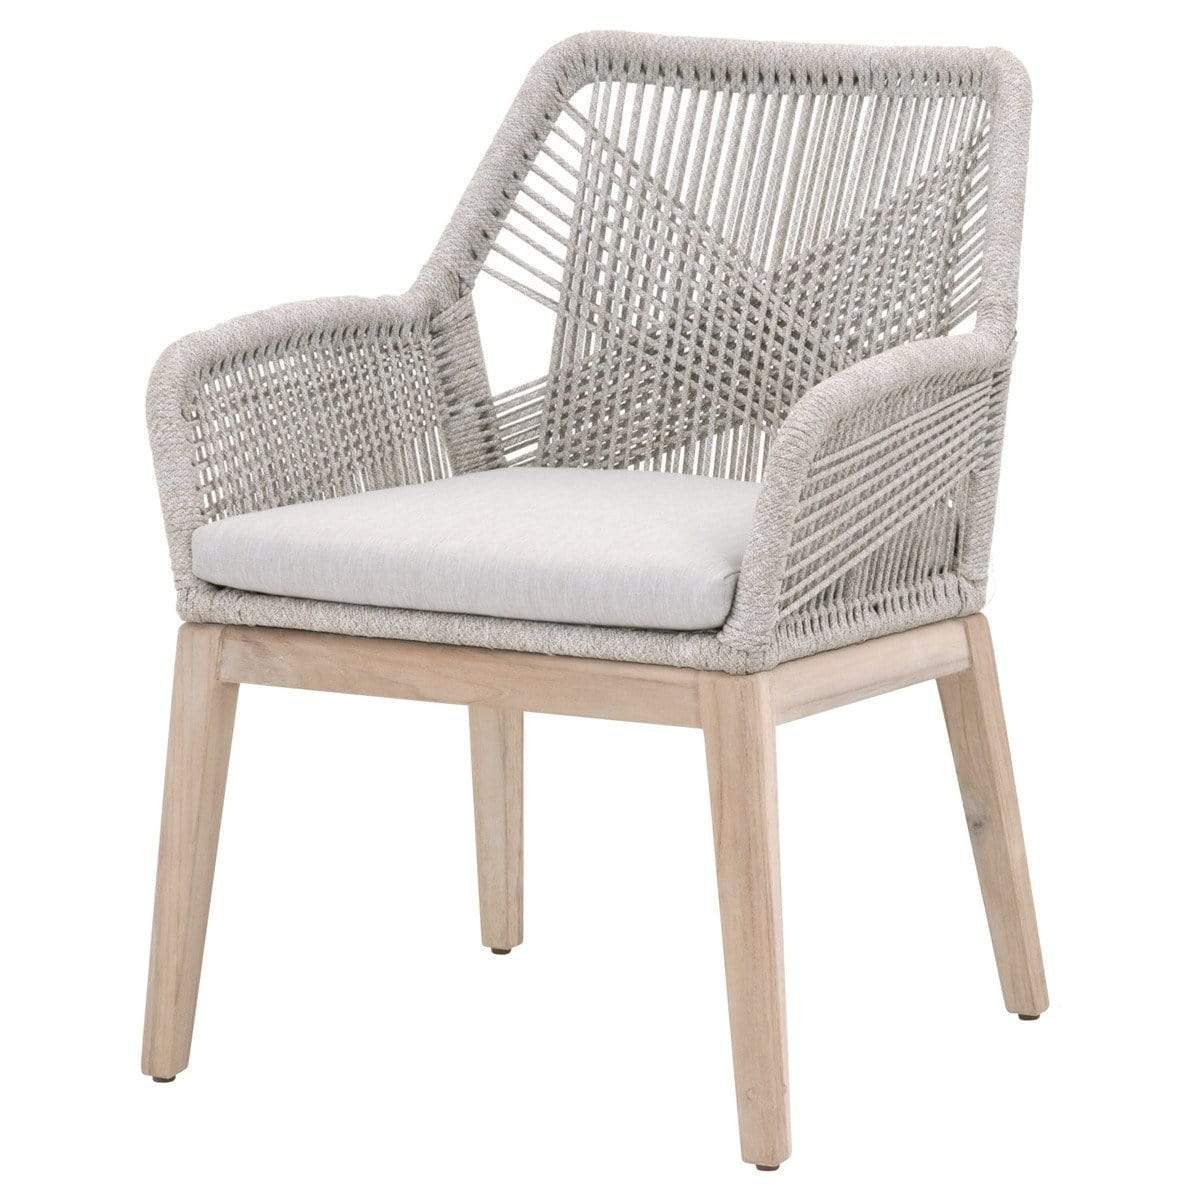 BLU Home Loom Outdoor Arm Chair - Taupe & White (Set of 2) Furniture orient-express-6809KD.WTA/PUM/GT